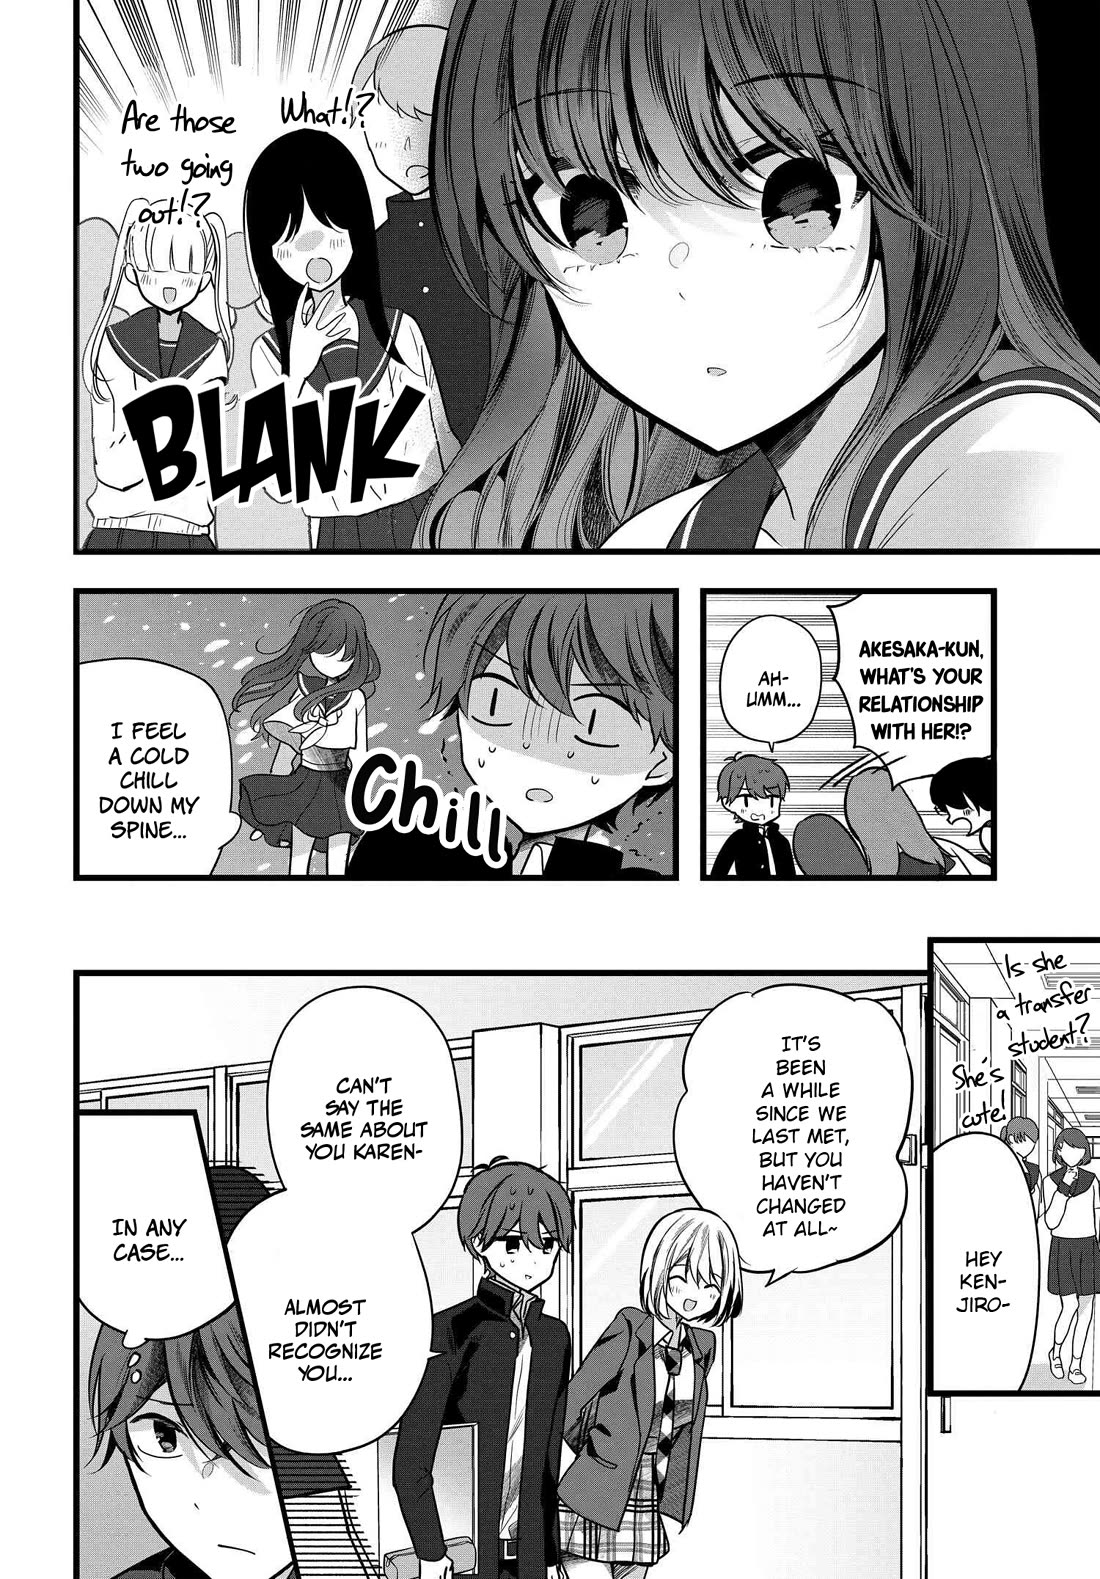 Tozaki-san Is Cold Only to Me - chapter 5 - #4